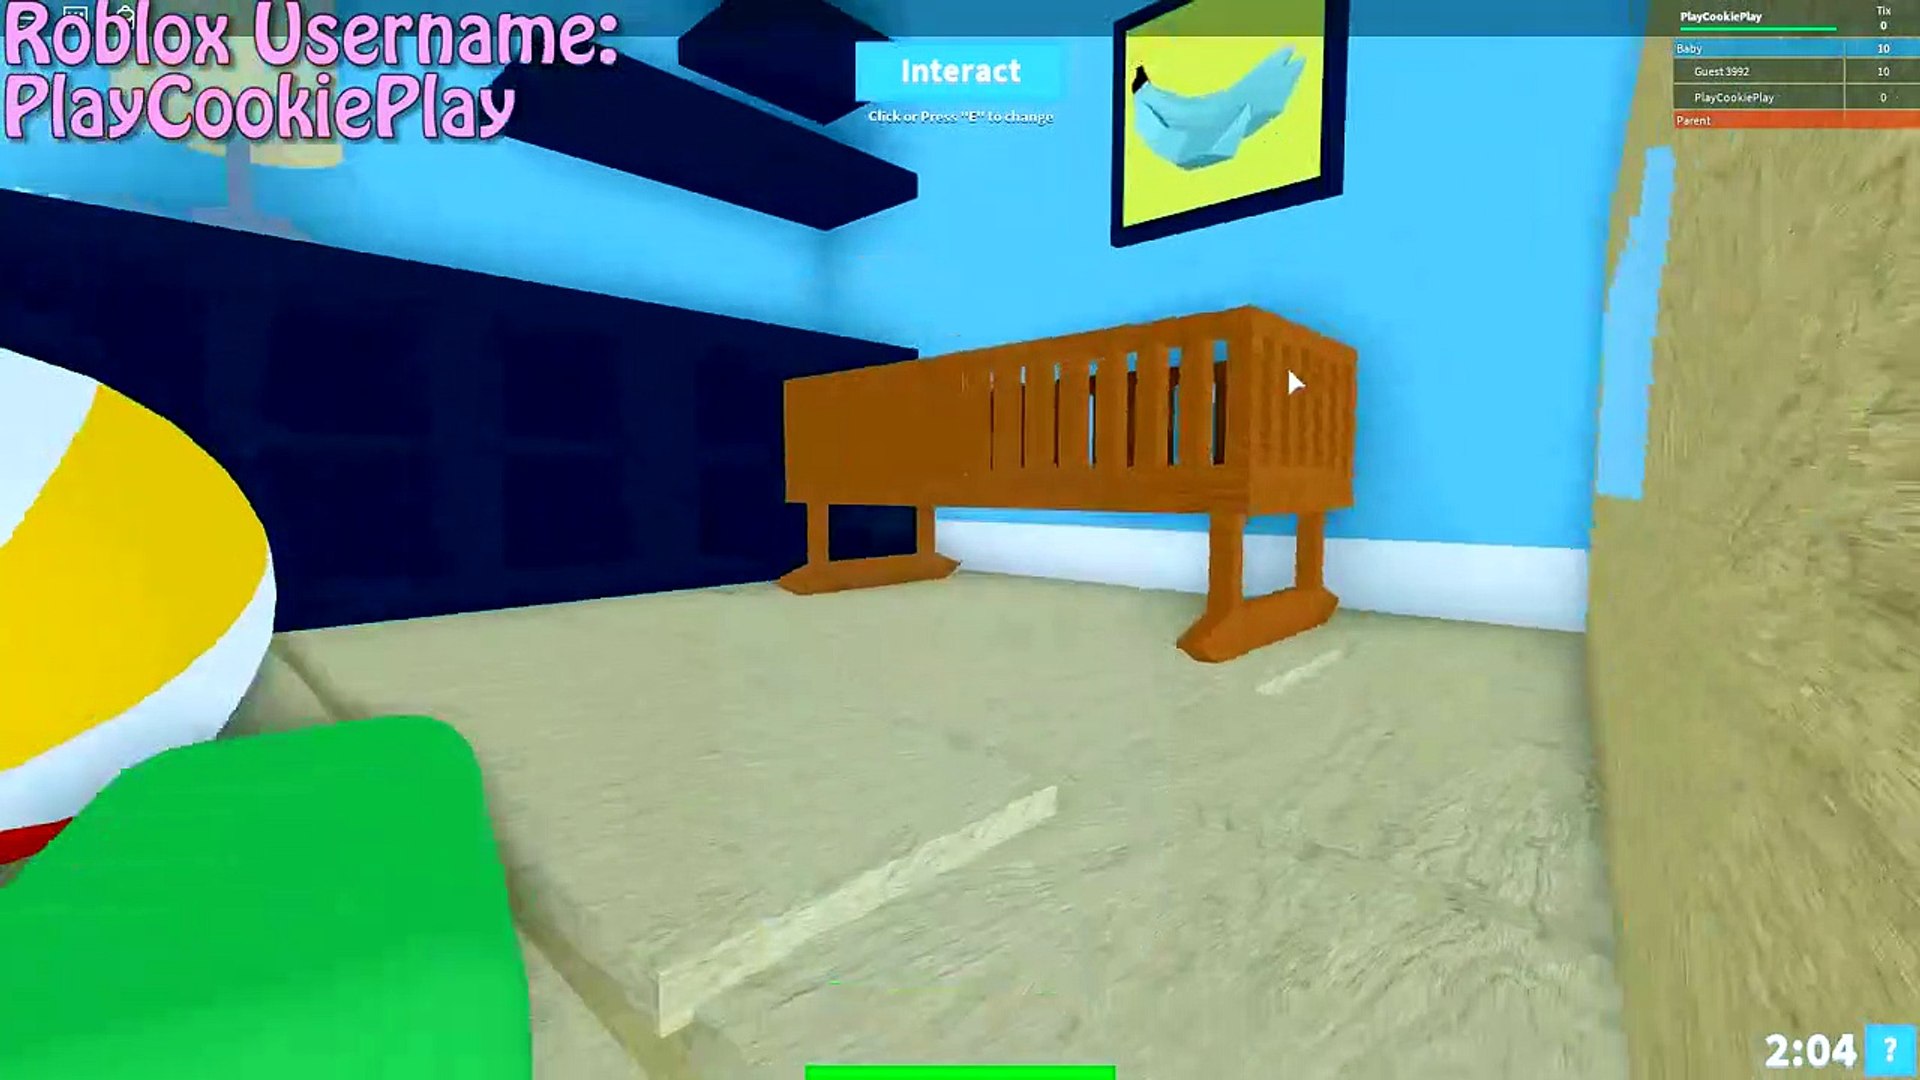 Hamsters In The House Roblox Animal House Pets Online Game Let S Play Random Fun Video Wmo Video Dailymotion - hamsters in the house roblox animal house pets online